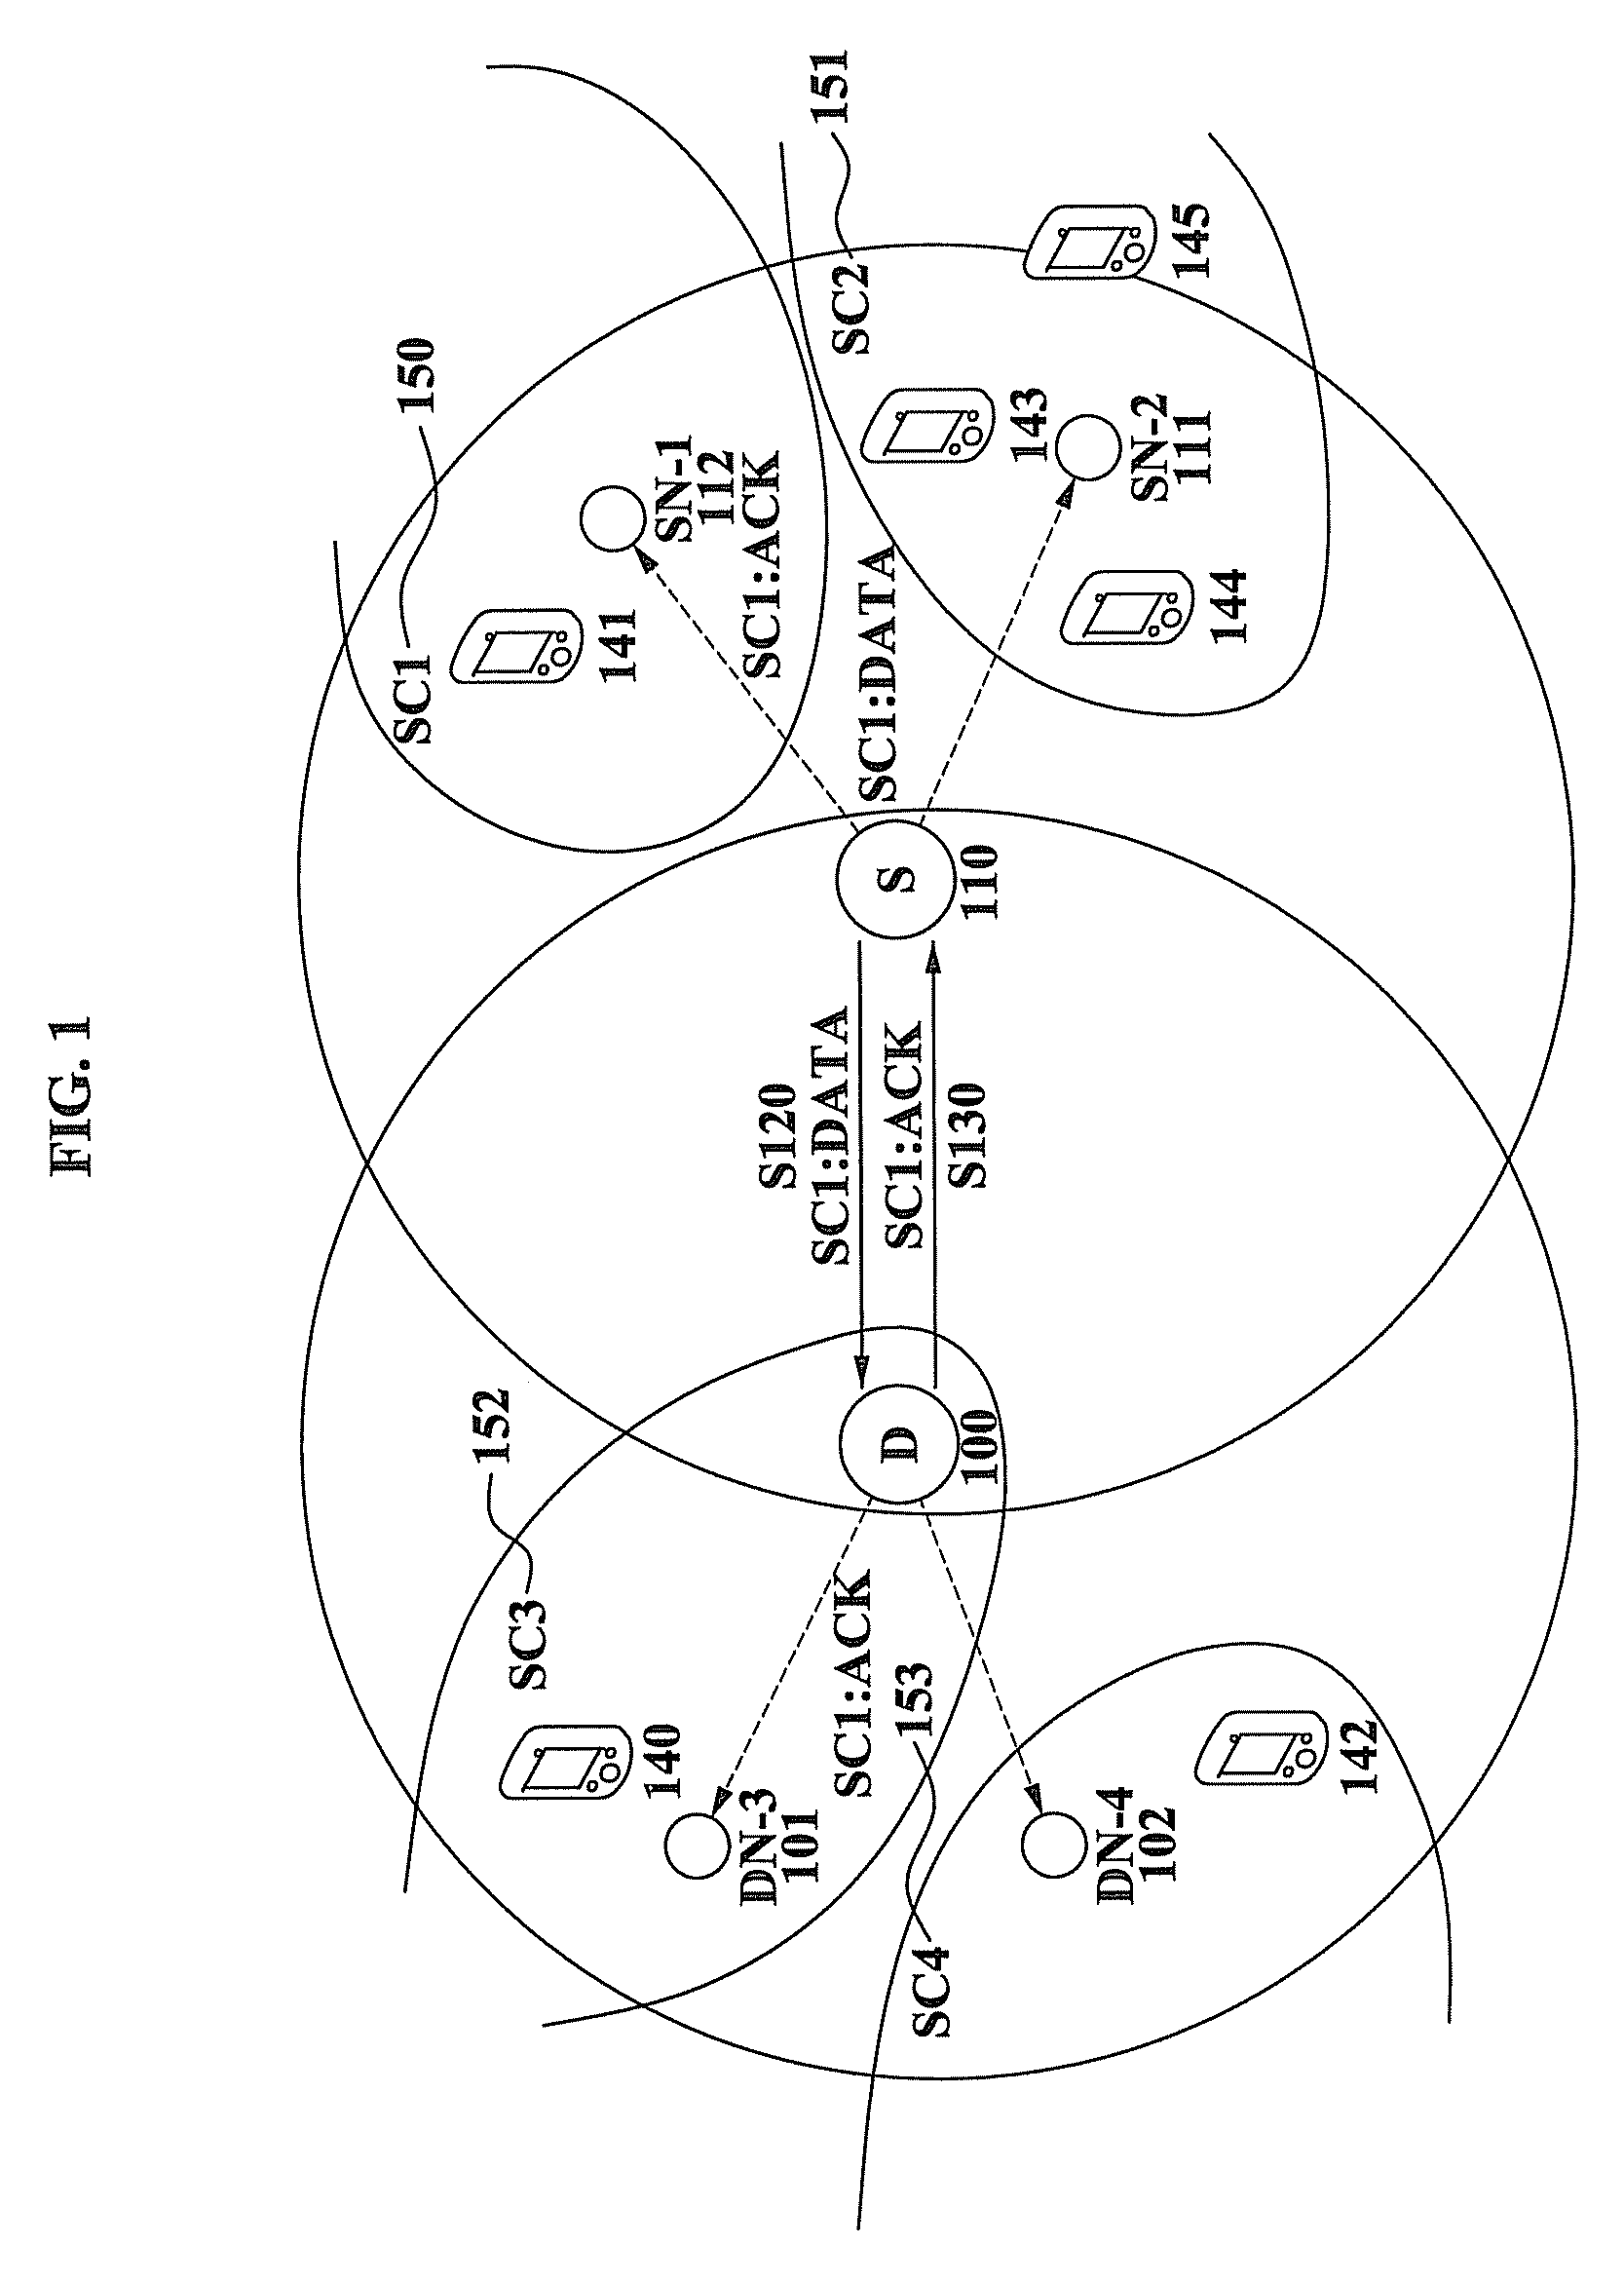 Communication method and apparatus for distributed network system where cognitive radio technology is applied